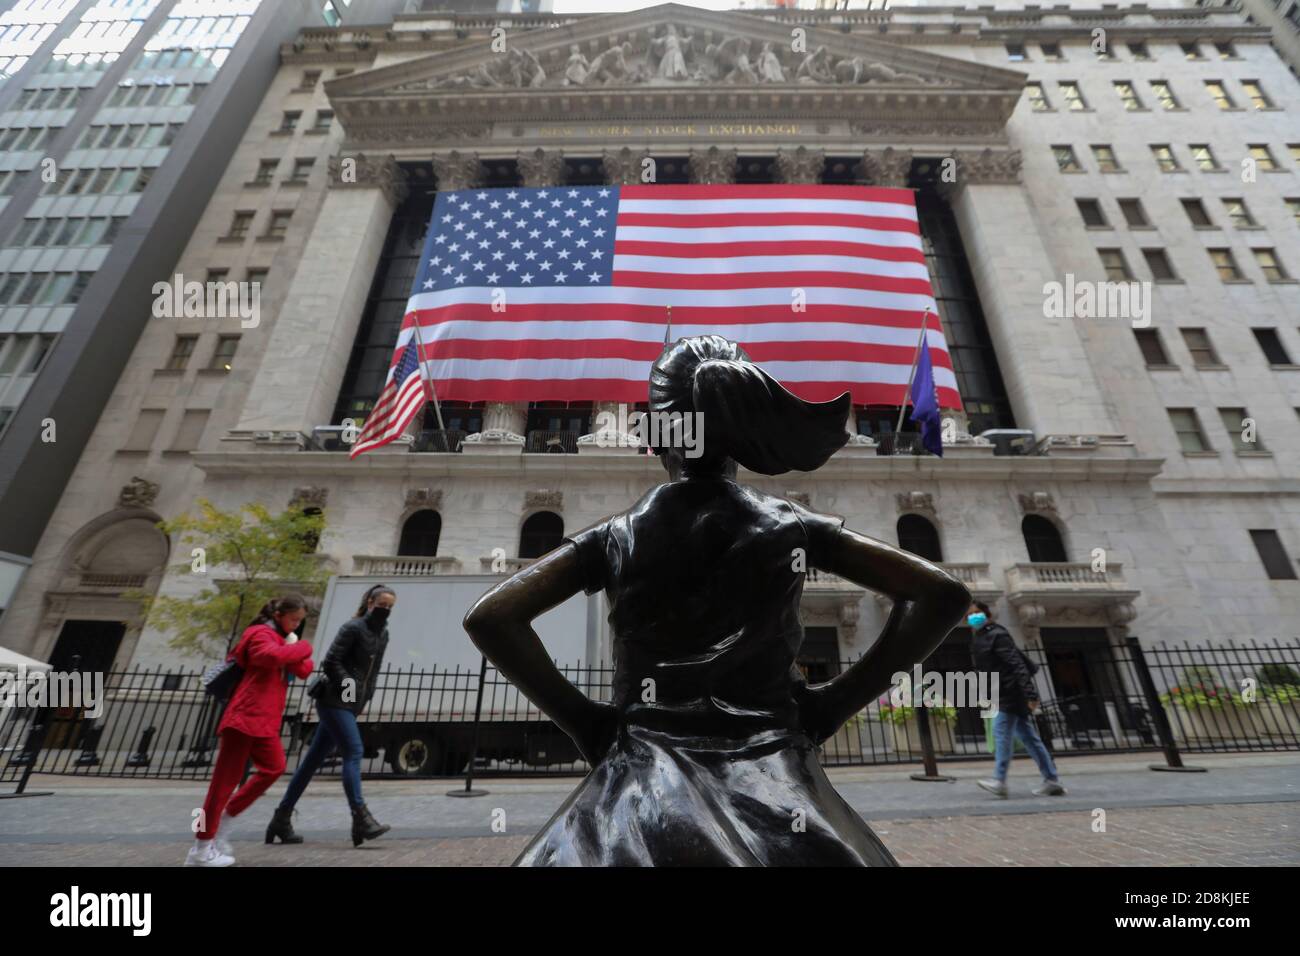 New York, USA. 30th Oct, 2020. Pedestrians walk past the New York Stock Exchange in New York, the United States, Oct. 30, 2020. U.S. stocks closed lower on Friday, as a pronounced slide in tech sector weighed on the market. The Dow Jones Industrial Average fell 157.51 points, or 0.59 percent, to 26,501.60. The S&P 500 was down 40.15 points, or 1.21 percent, to 3,269.96. The Nasdaq Composite Index shed 274.00 points, or 2.45 percent, to 10,911.59. Credit: Wang Ying/Xinhua/Alamy Live News Stock Photo